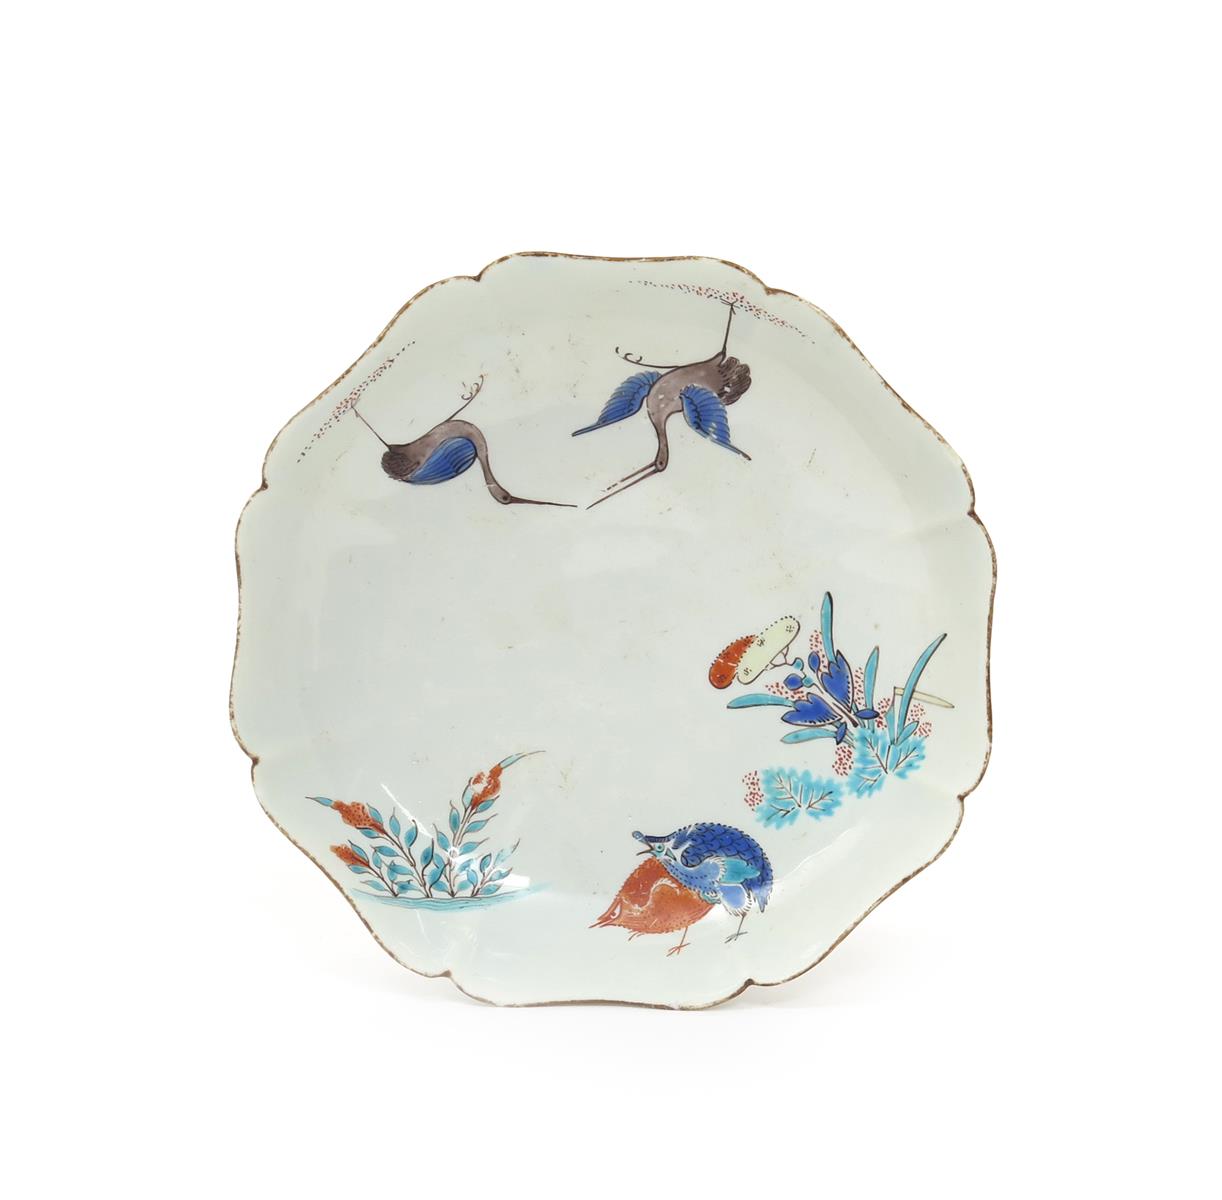 A Chantilly lobed saucer, c.1730-35, painted in the Kakiemon palette with a version of the Two Quail